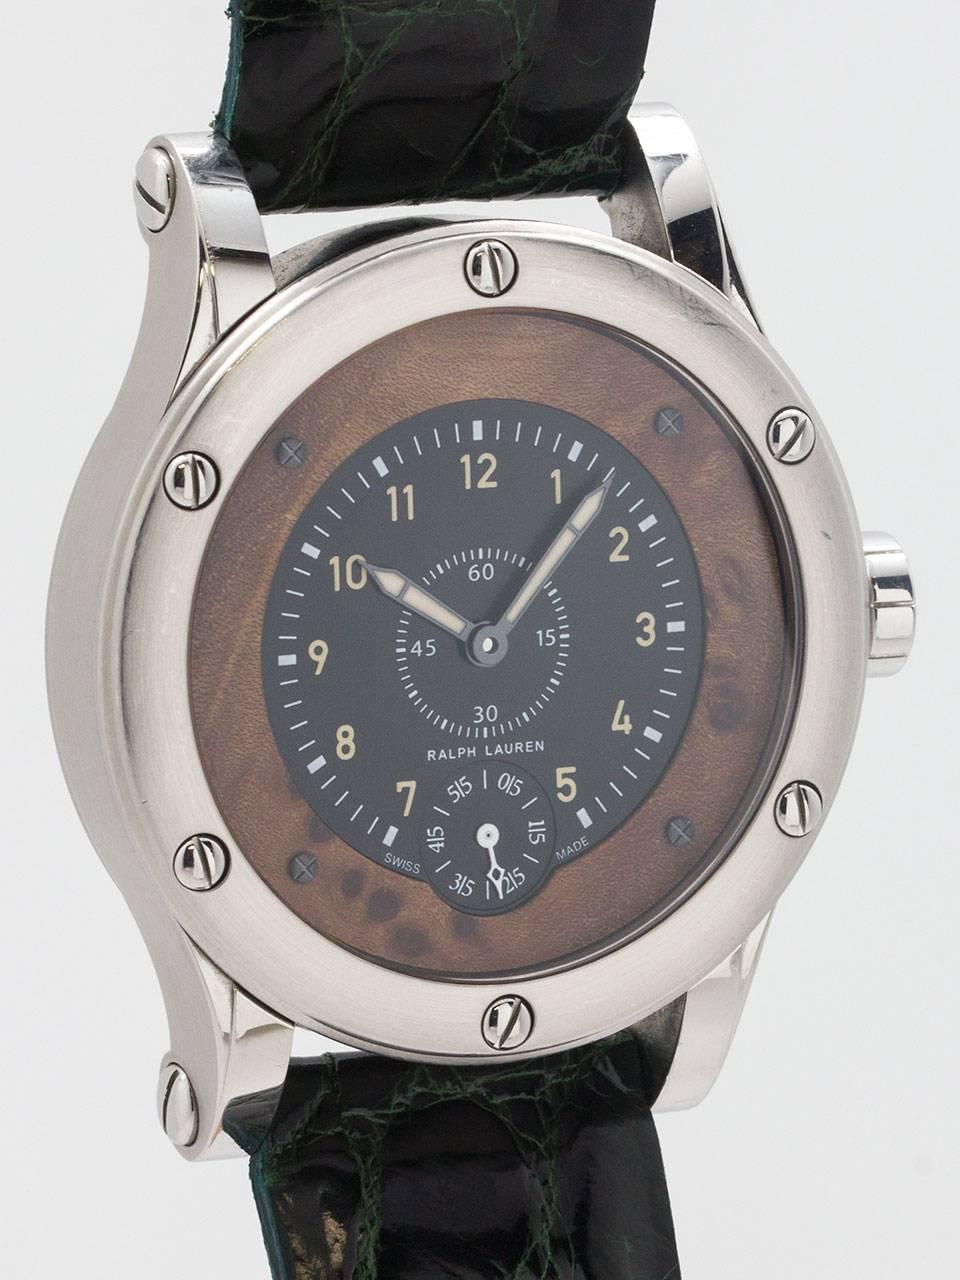 Ralph Lauren Stainless Steel Ltd Ed Sporting Automotive Manual Wristwatch, c2012 In Excellent Condition For Sale In West Hollywood, CA